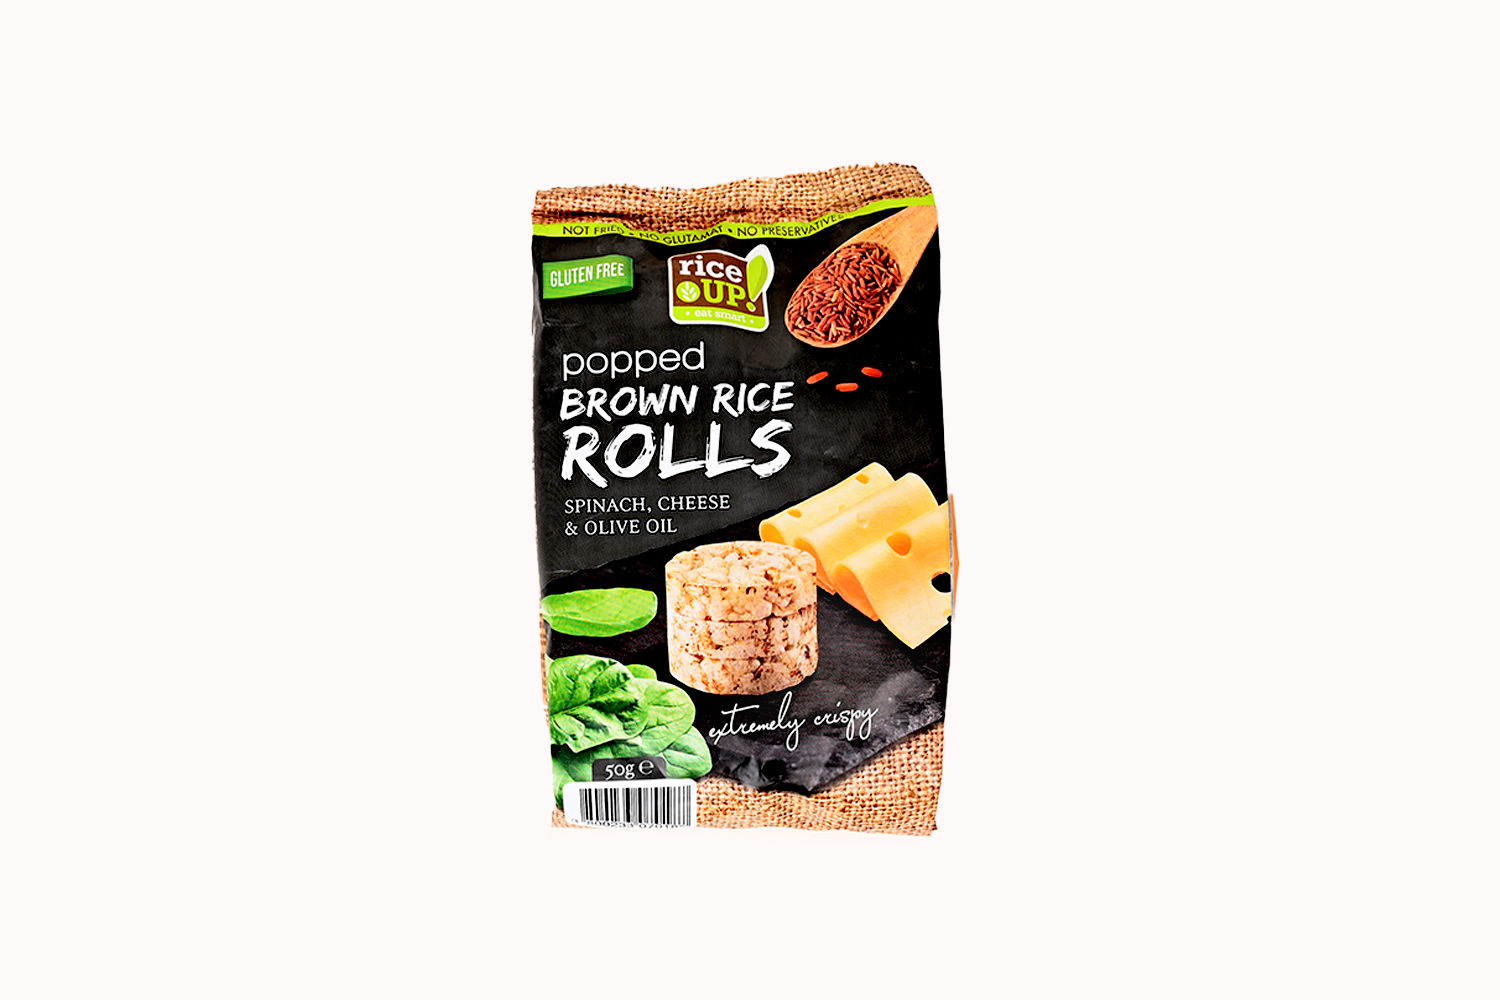 RiceUP! Spinach and Cheese Brown Rice Rolls